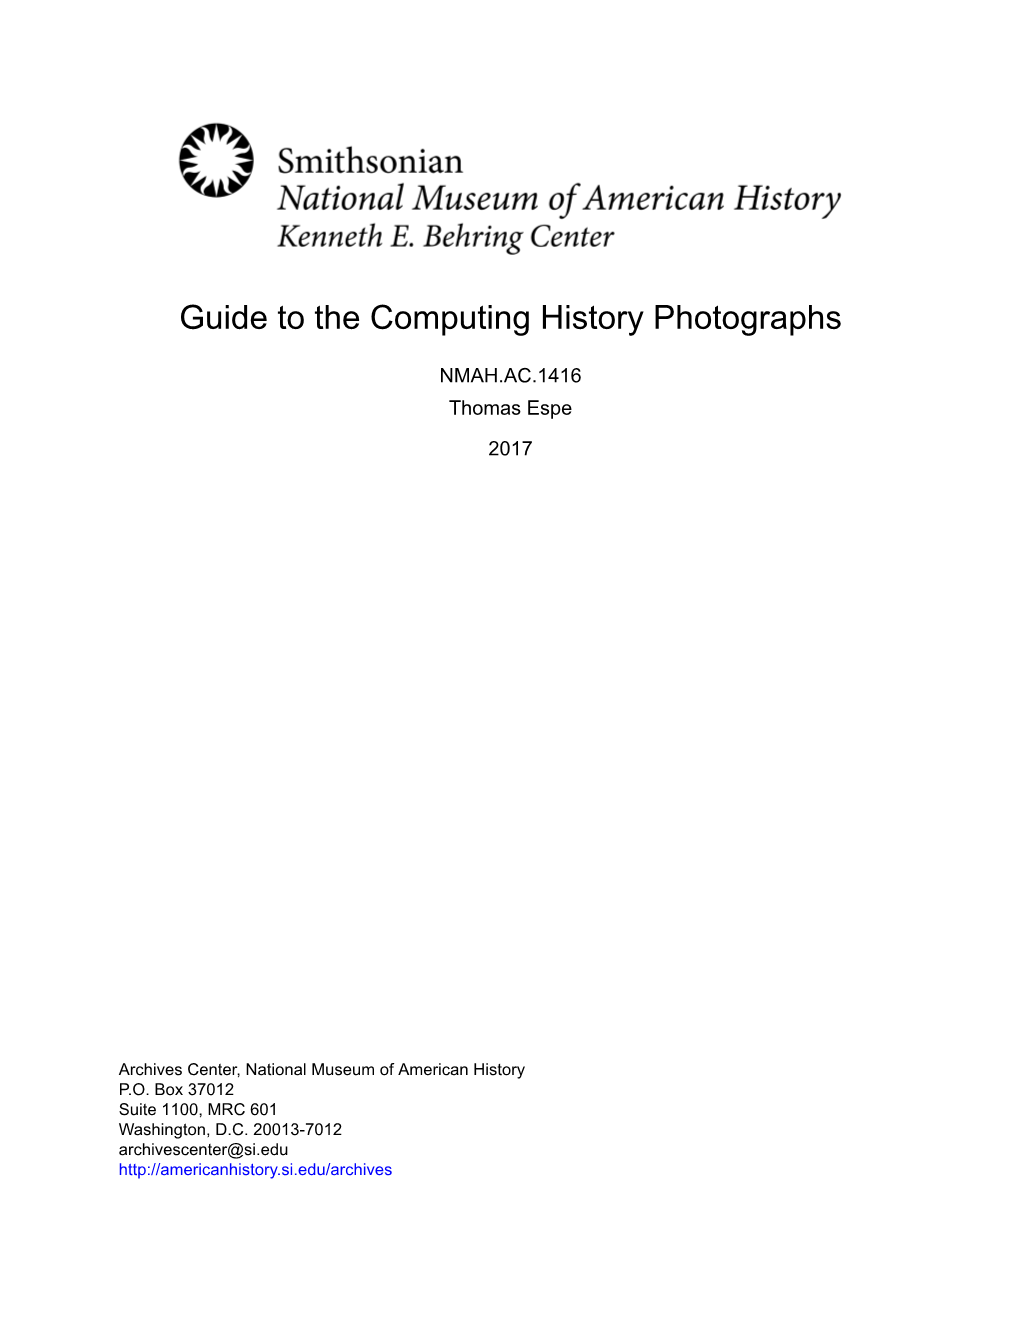 Guide to the Computing History Photographs